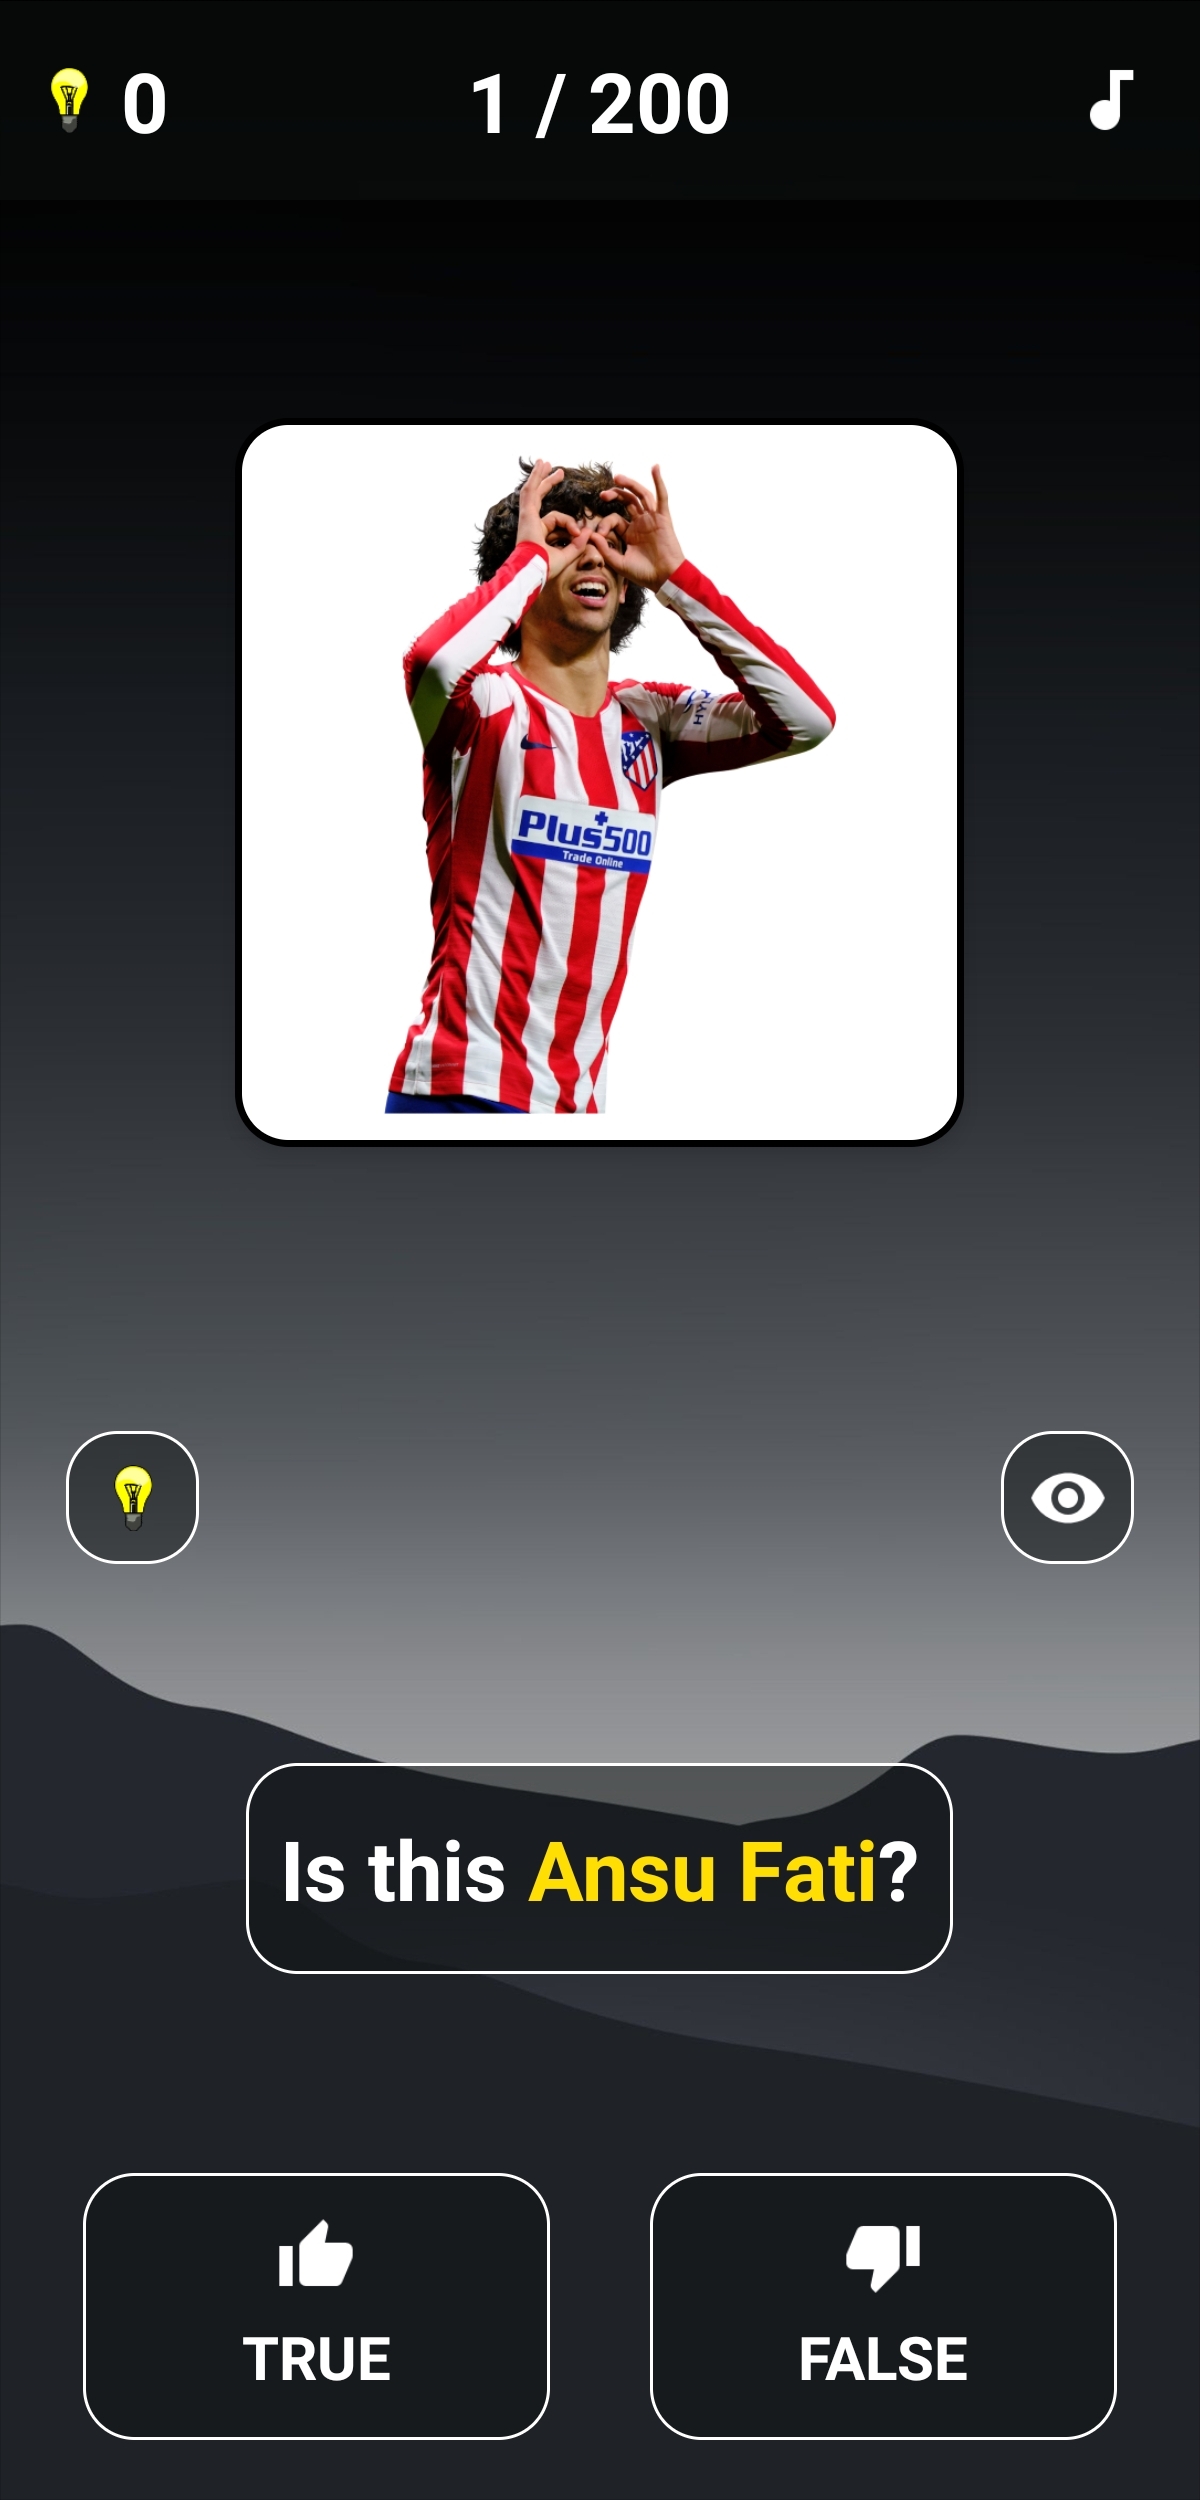 Footballer Quiz - Guess Soccer Football Player on the App Store